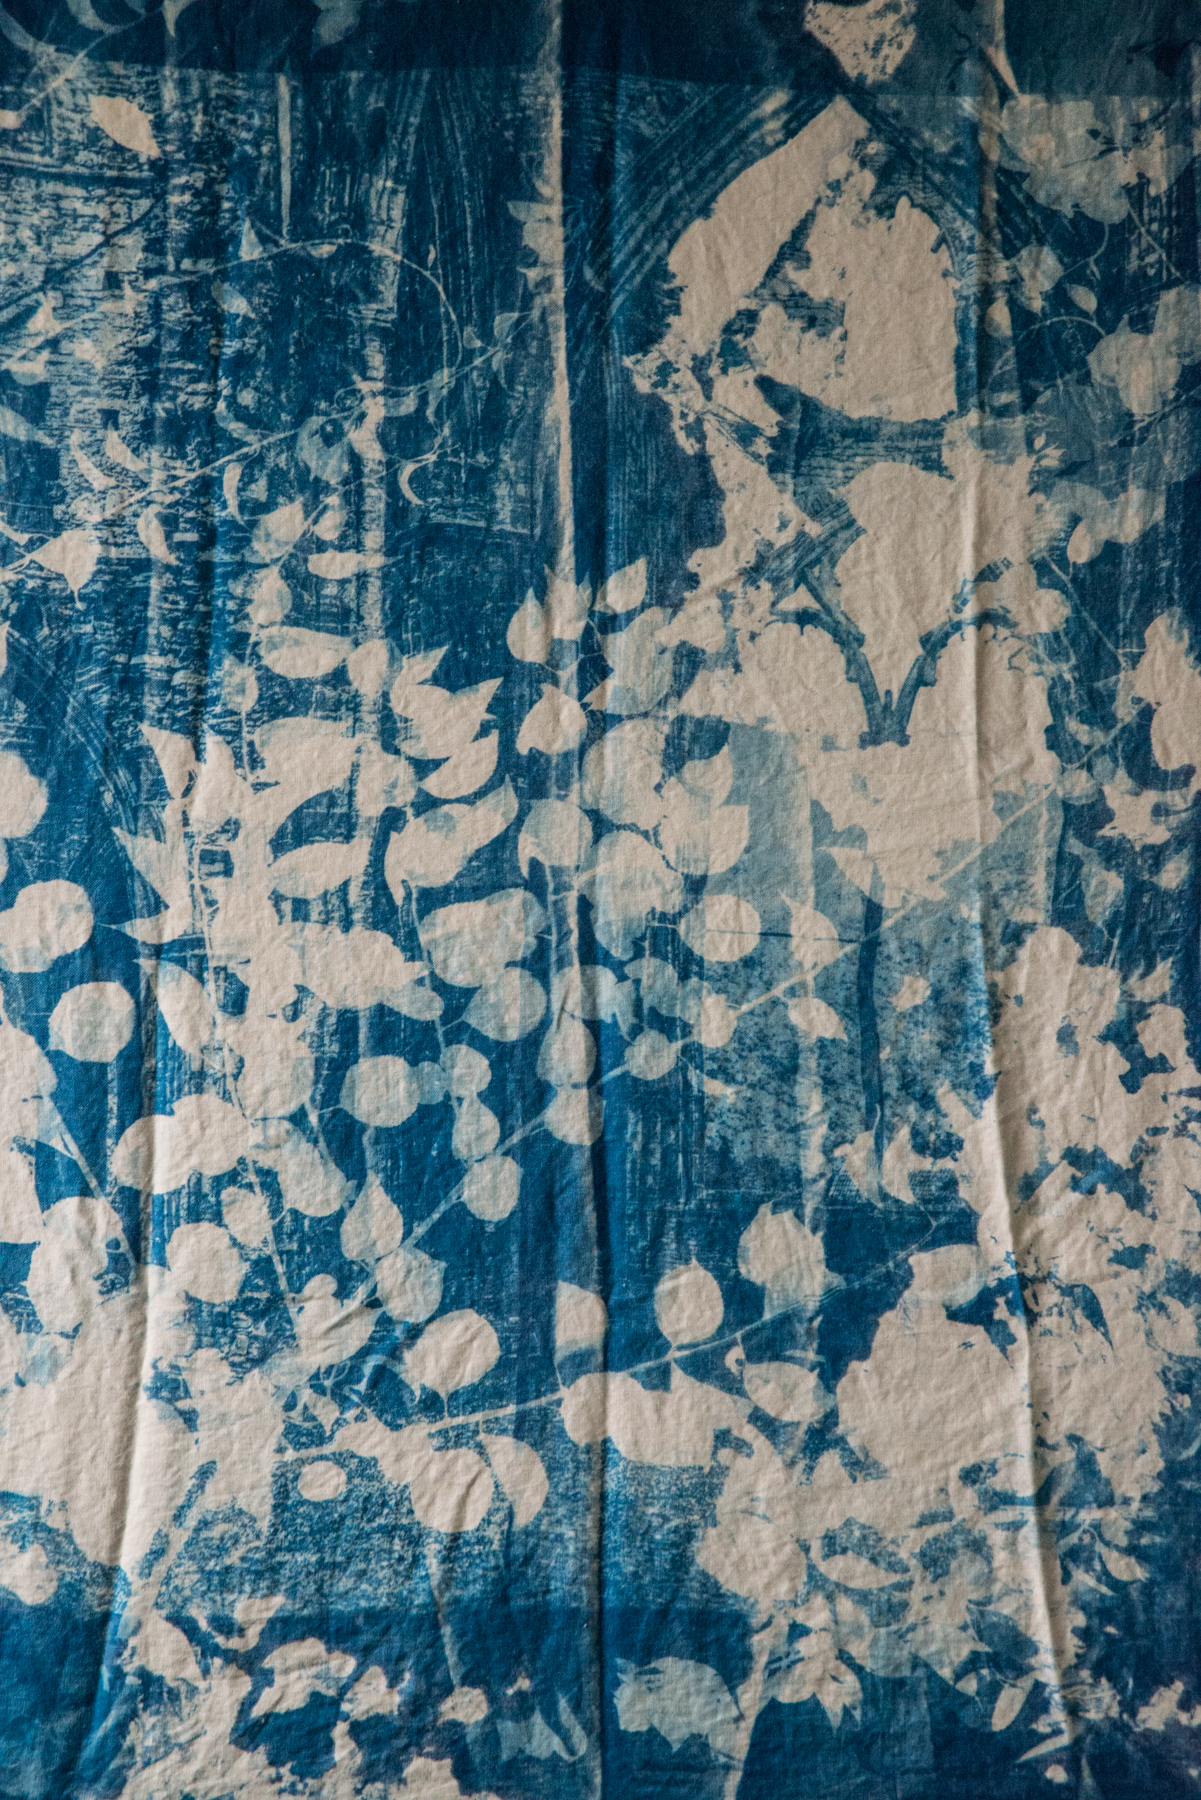  Marie Craig,  Abbey Ruin 7,  cyanotype on linen stretched over canvas, 36x48 